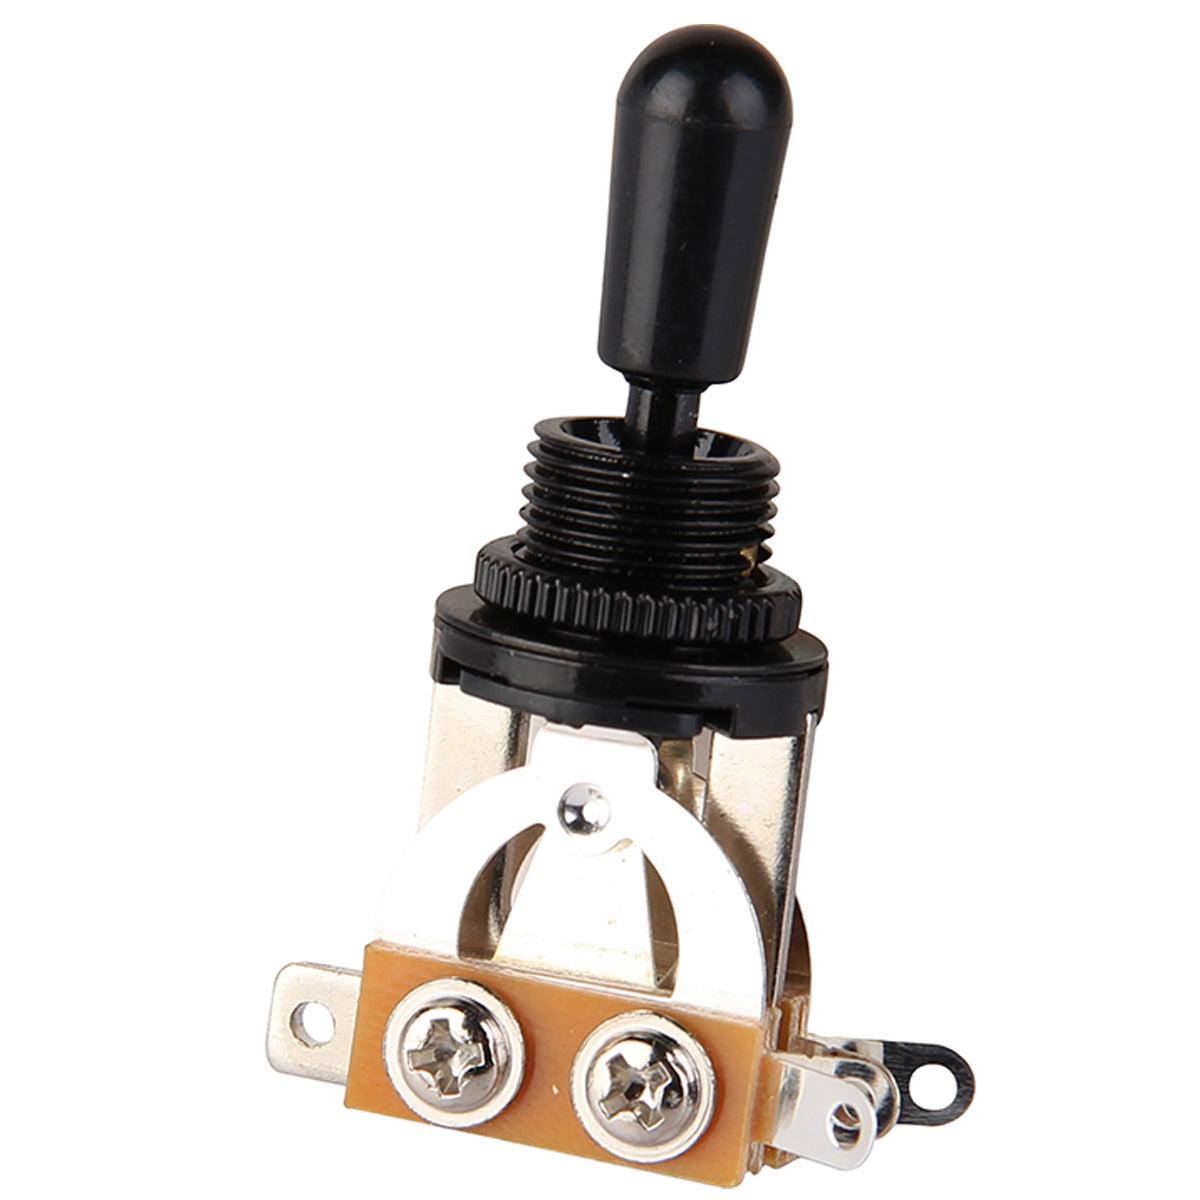 Musiclily Metric 3 Way Guitar Pickup Toggle Switch,  Black Top with Black Tip